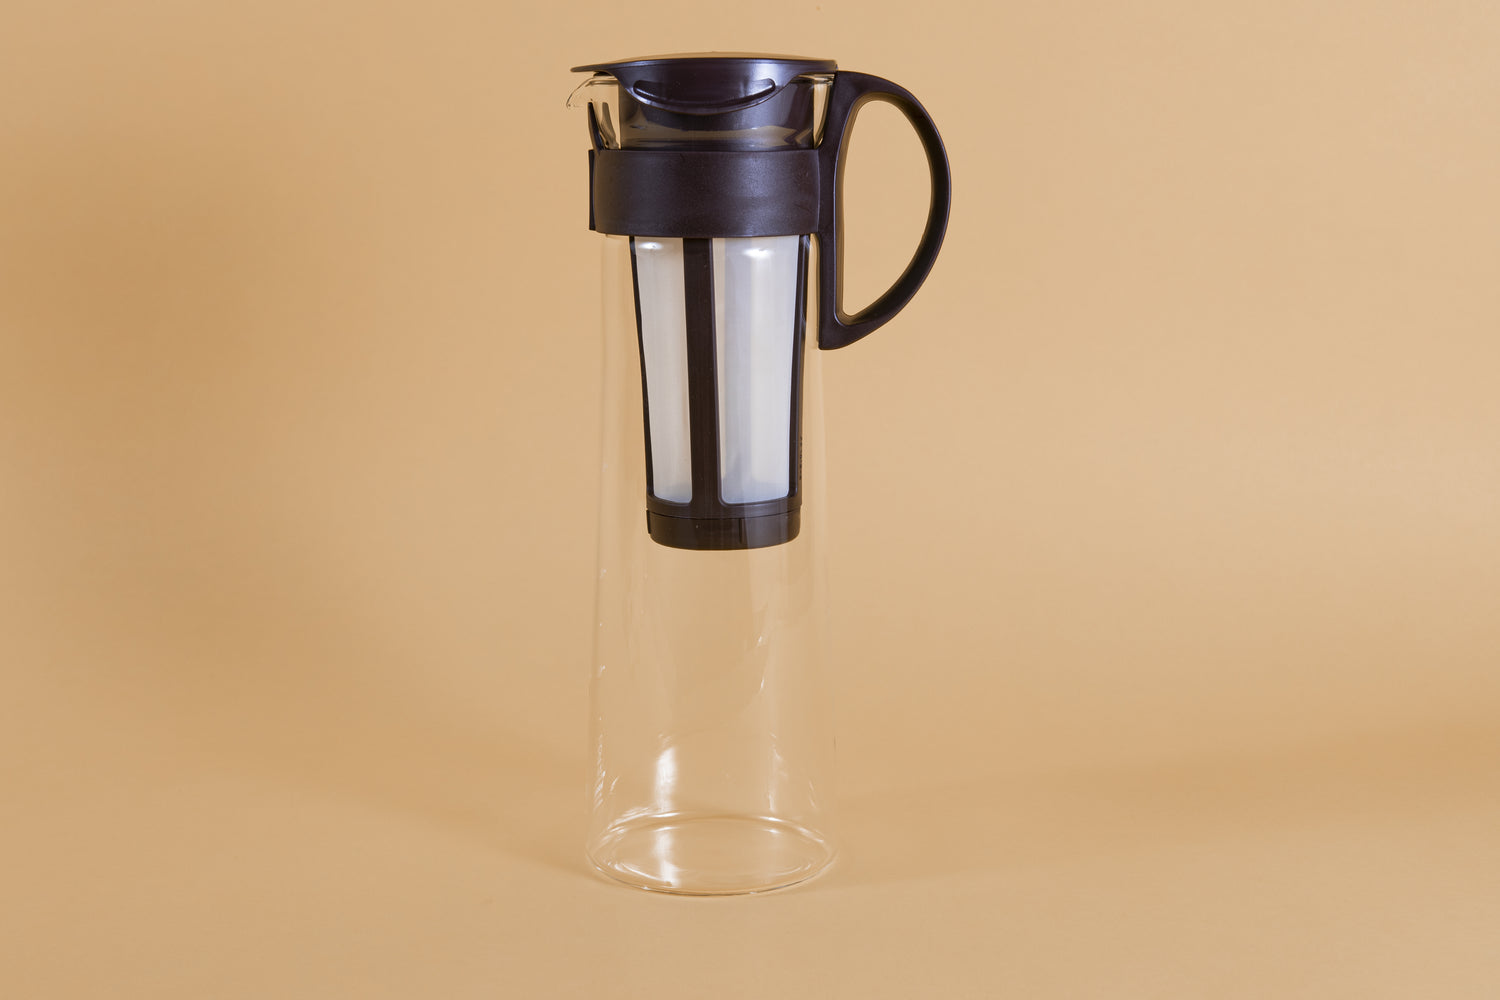 Tall glass server with white nylon mesh coffee filter insert and chocolate brown plastic handle and lid.